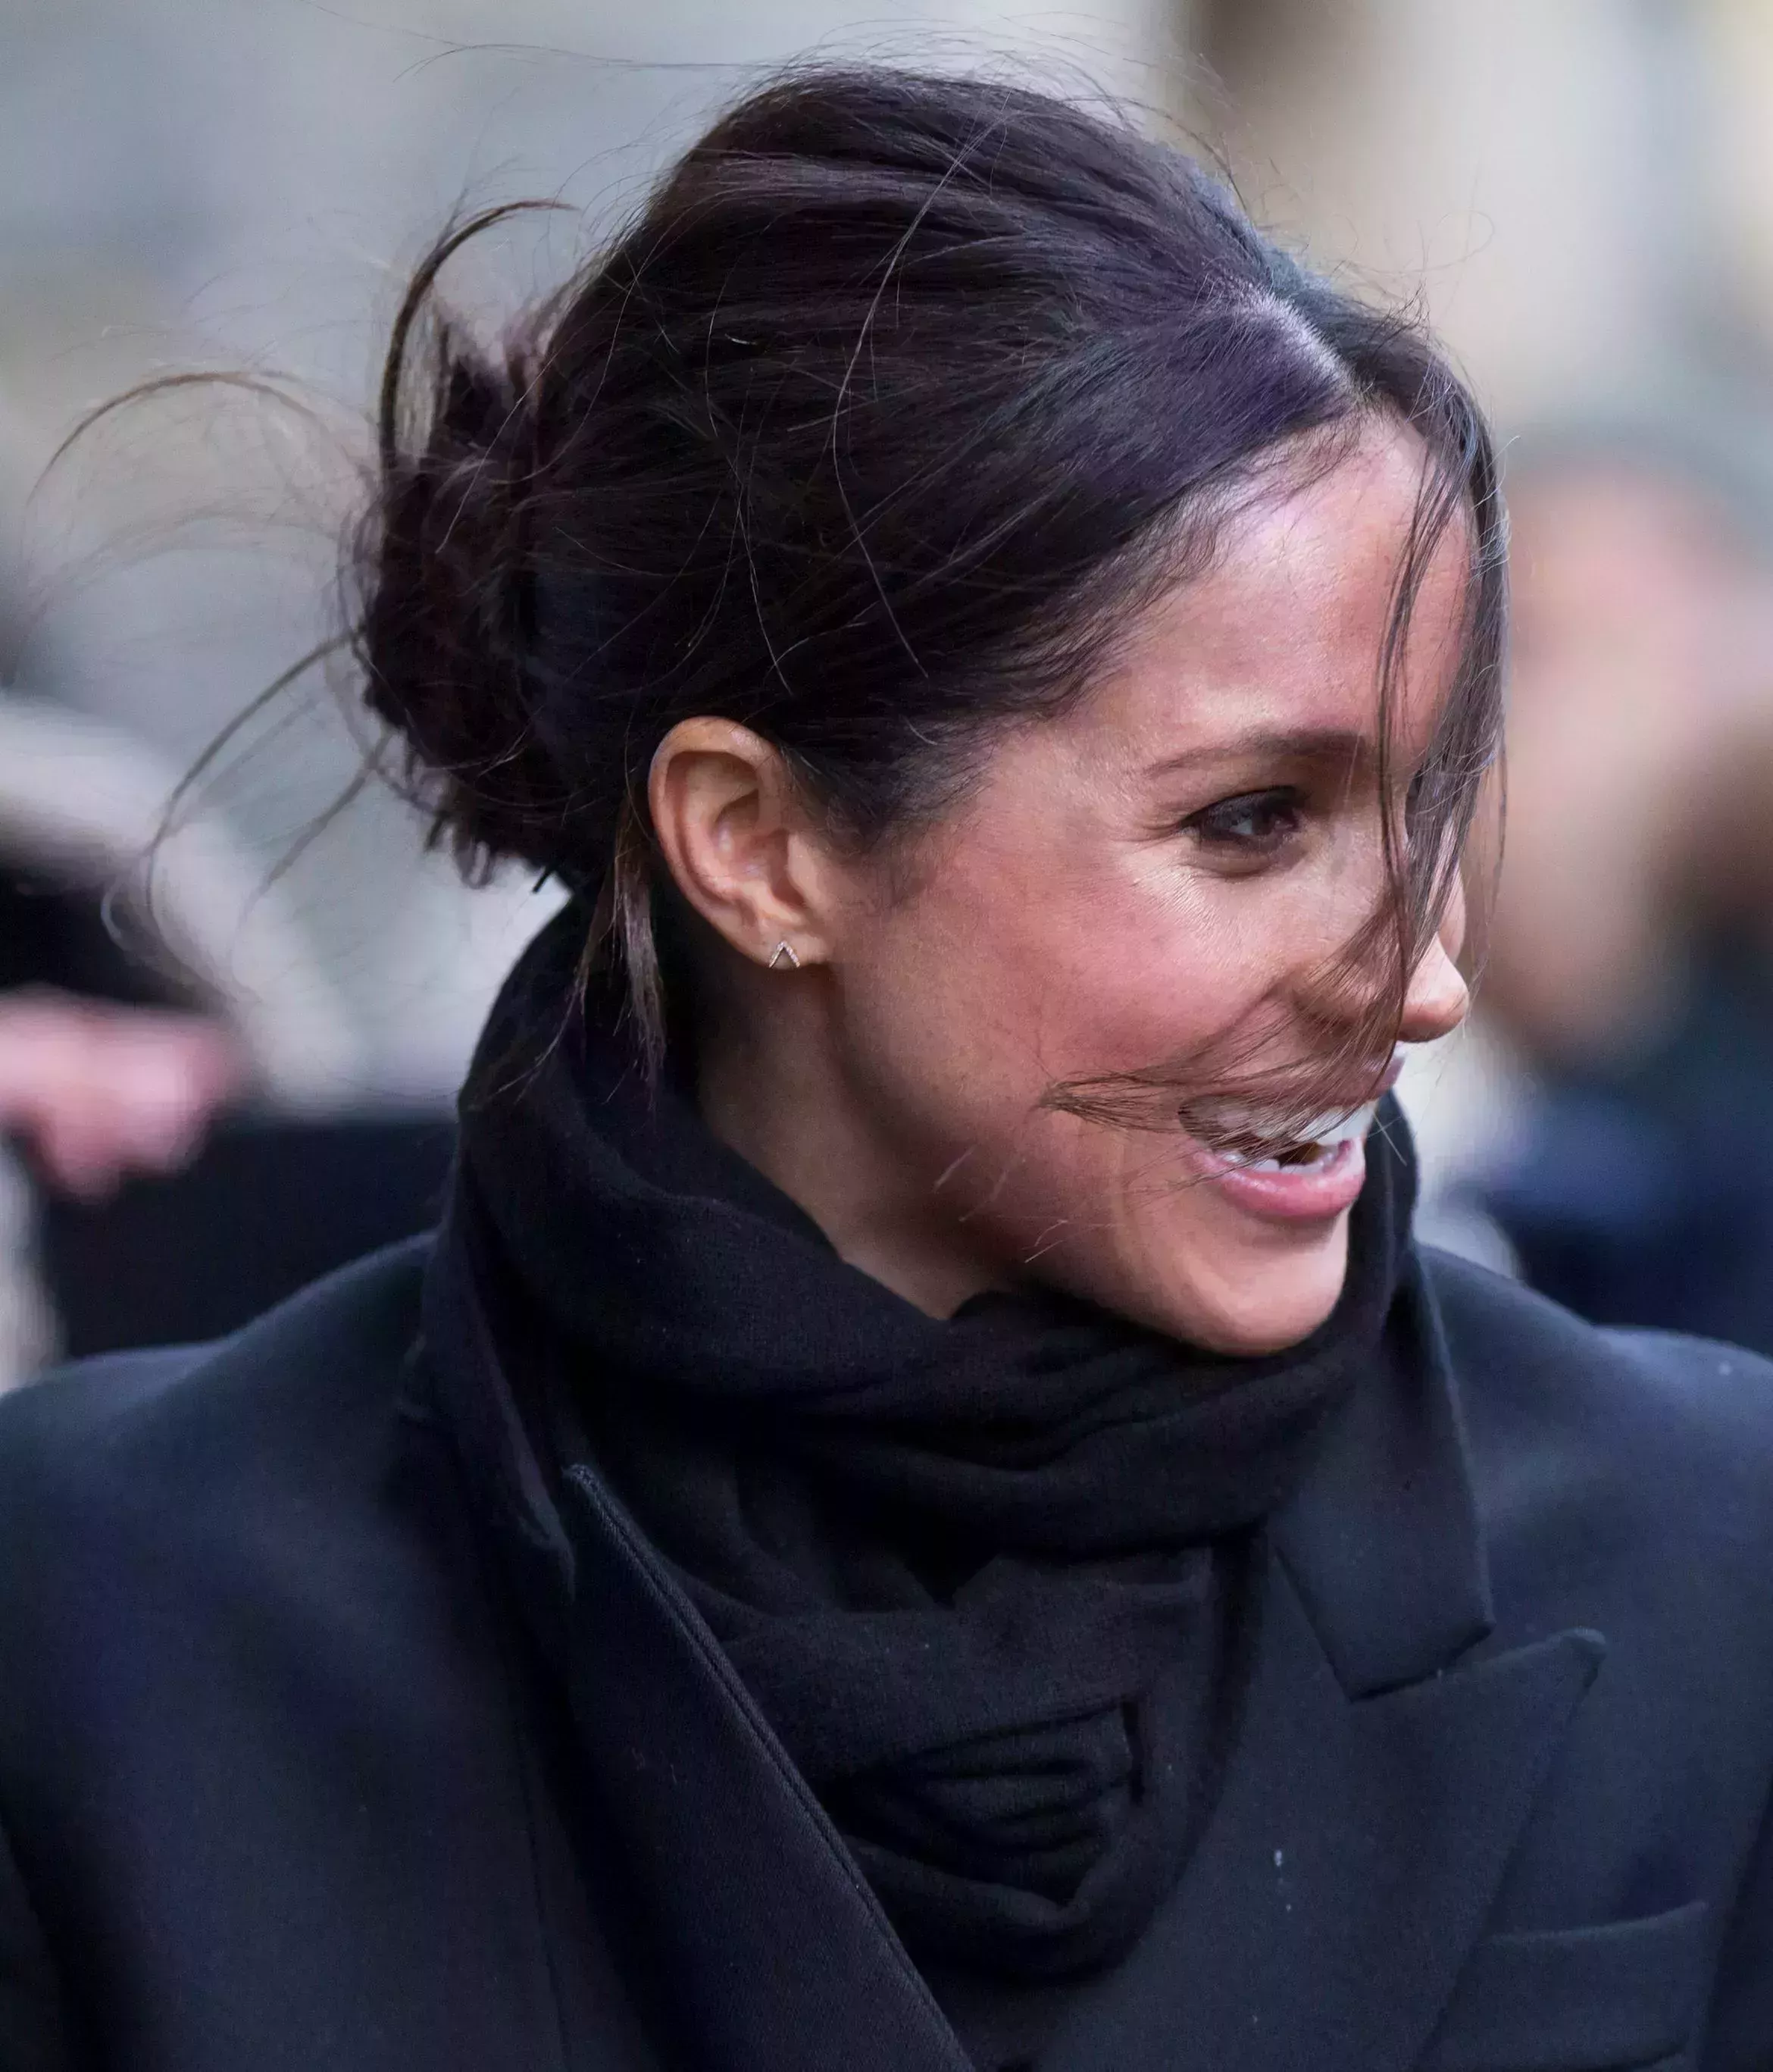 Meghan Markle’s Casual yet Royal Updo